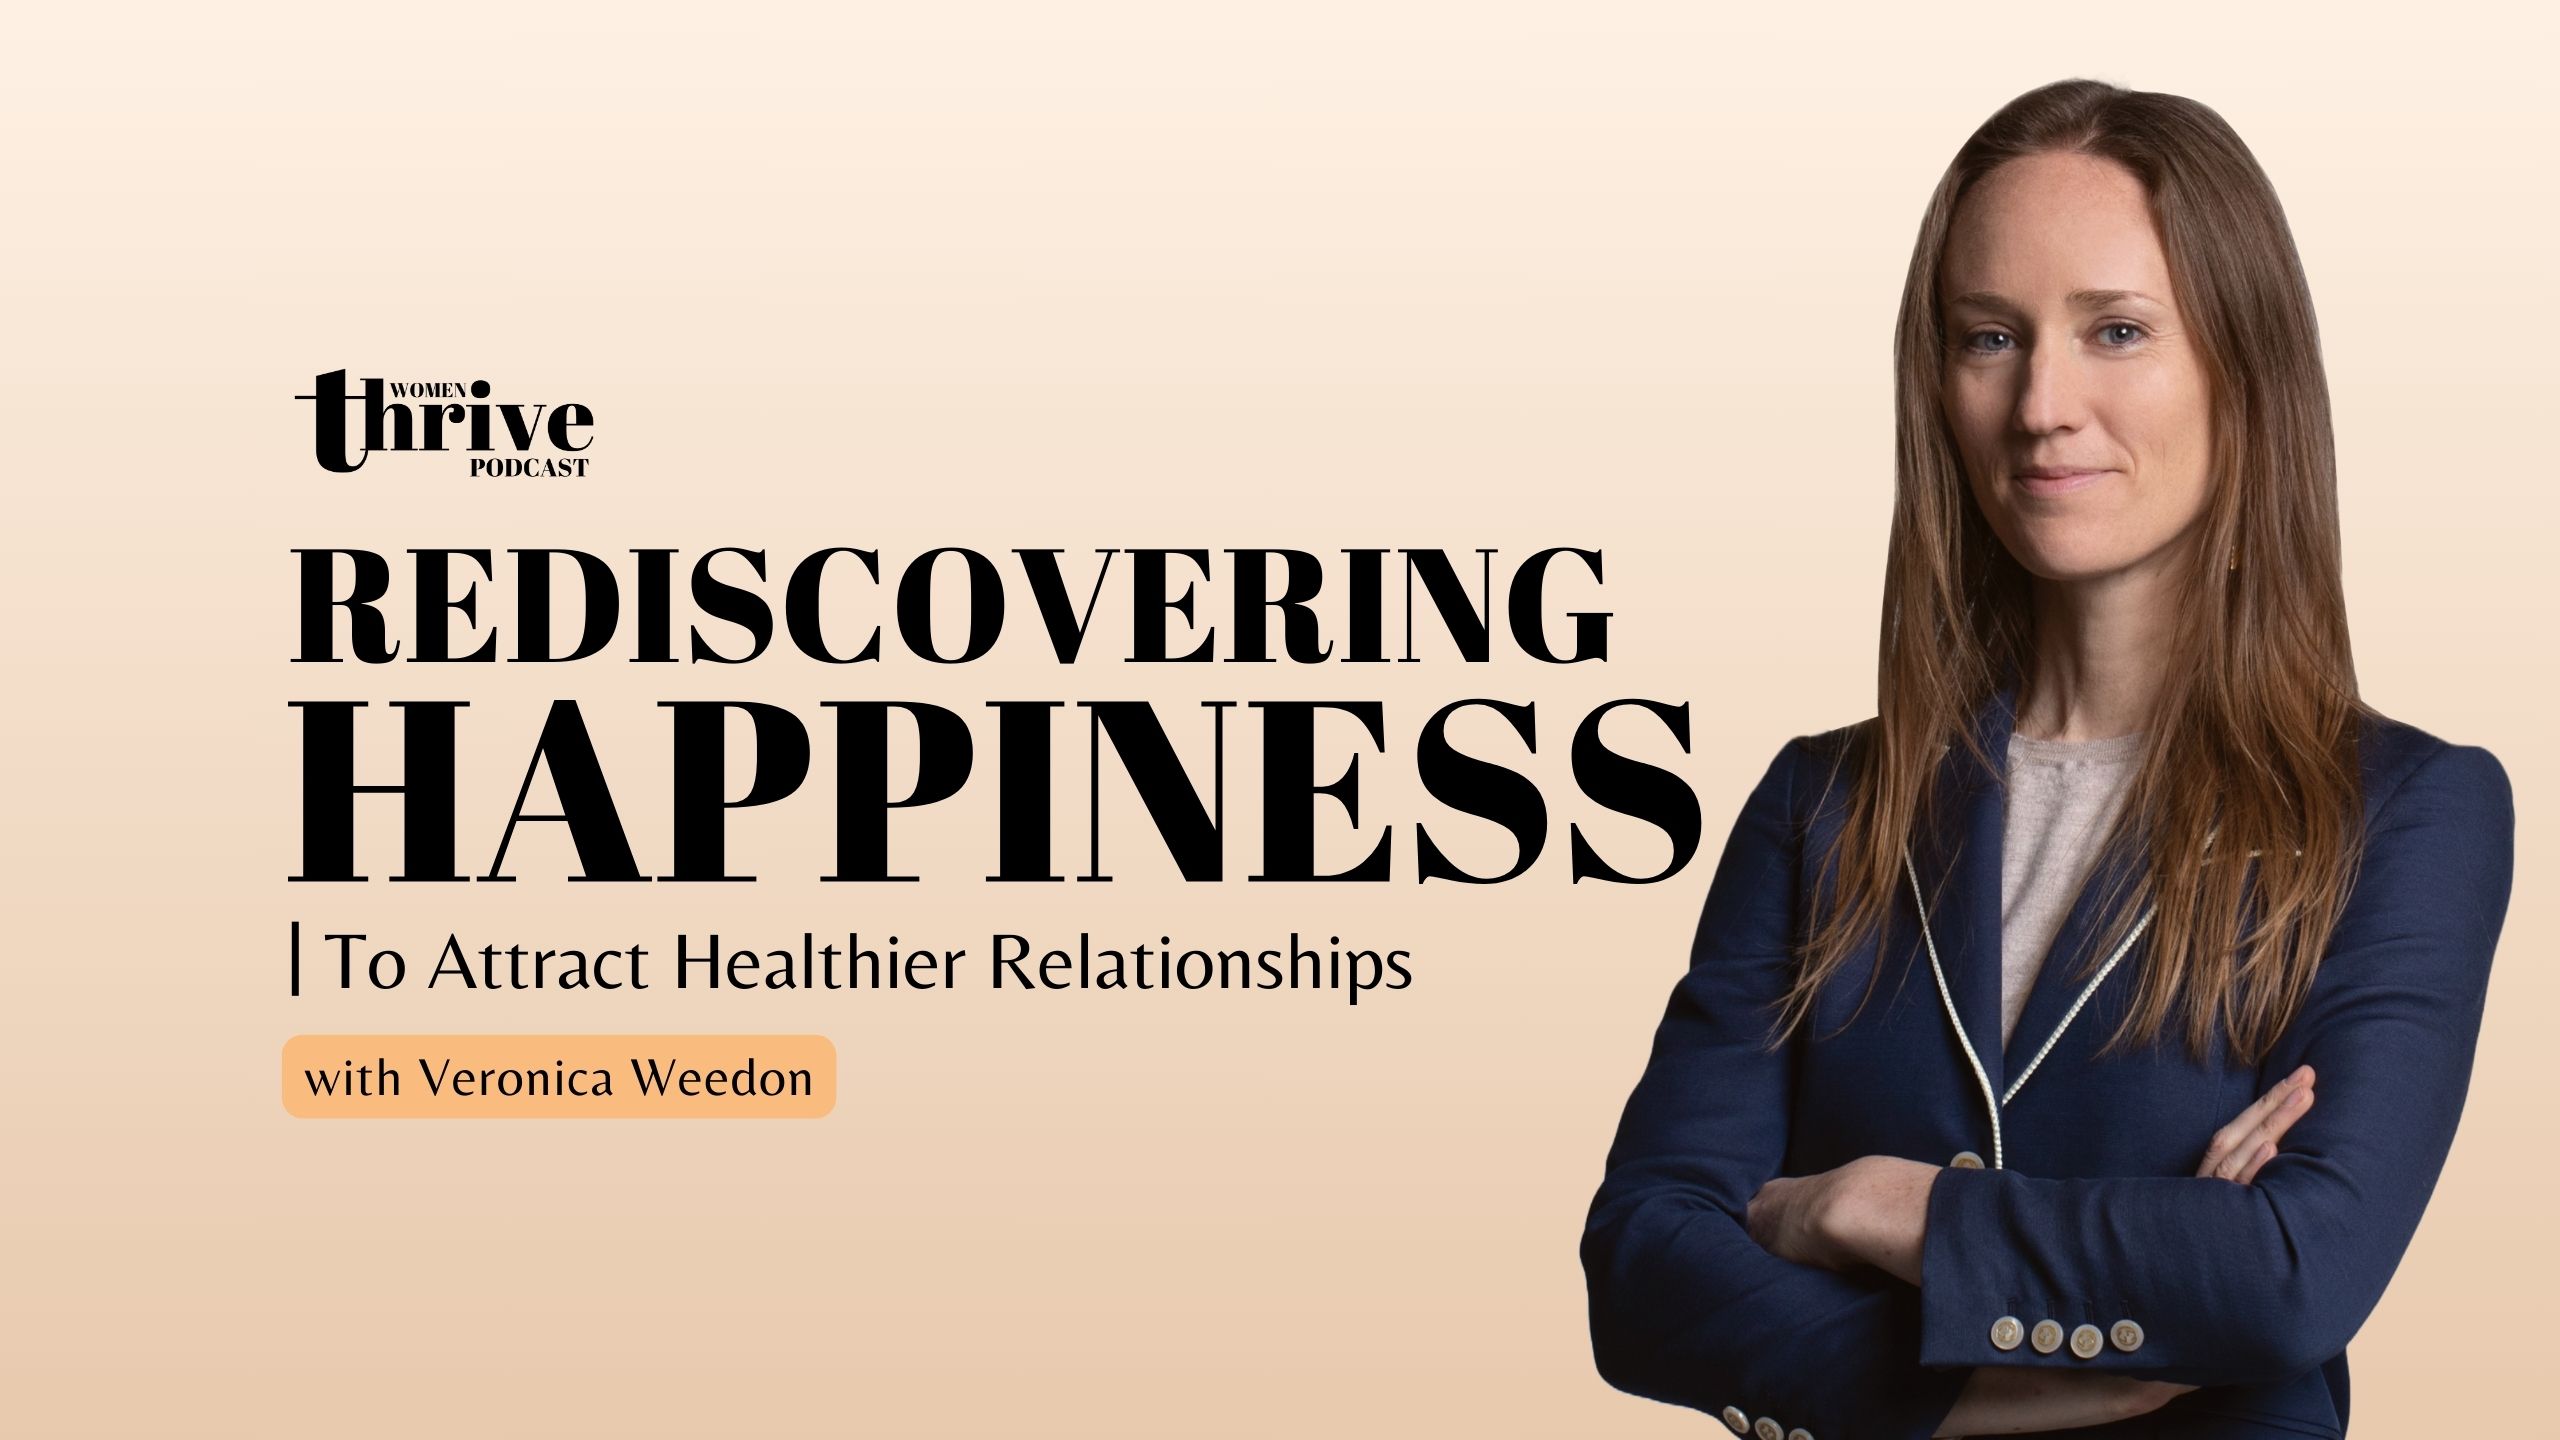 Rediscovering Happiness to Attract Healthier Relationships with Veronica Weedon